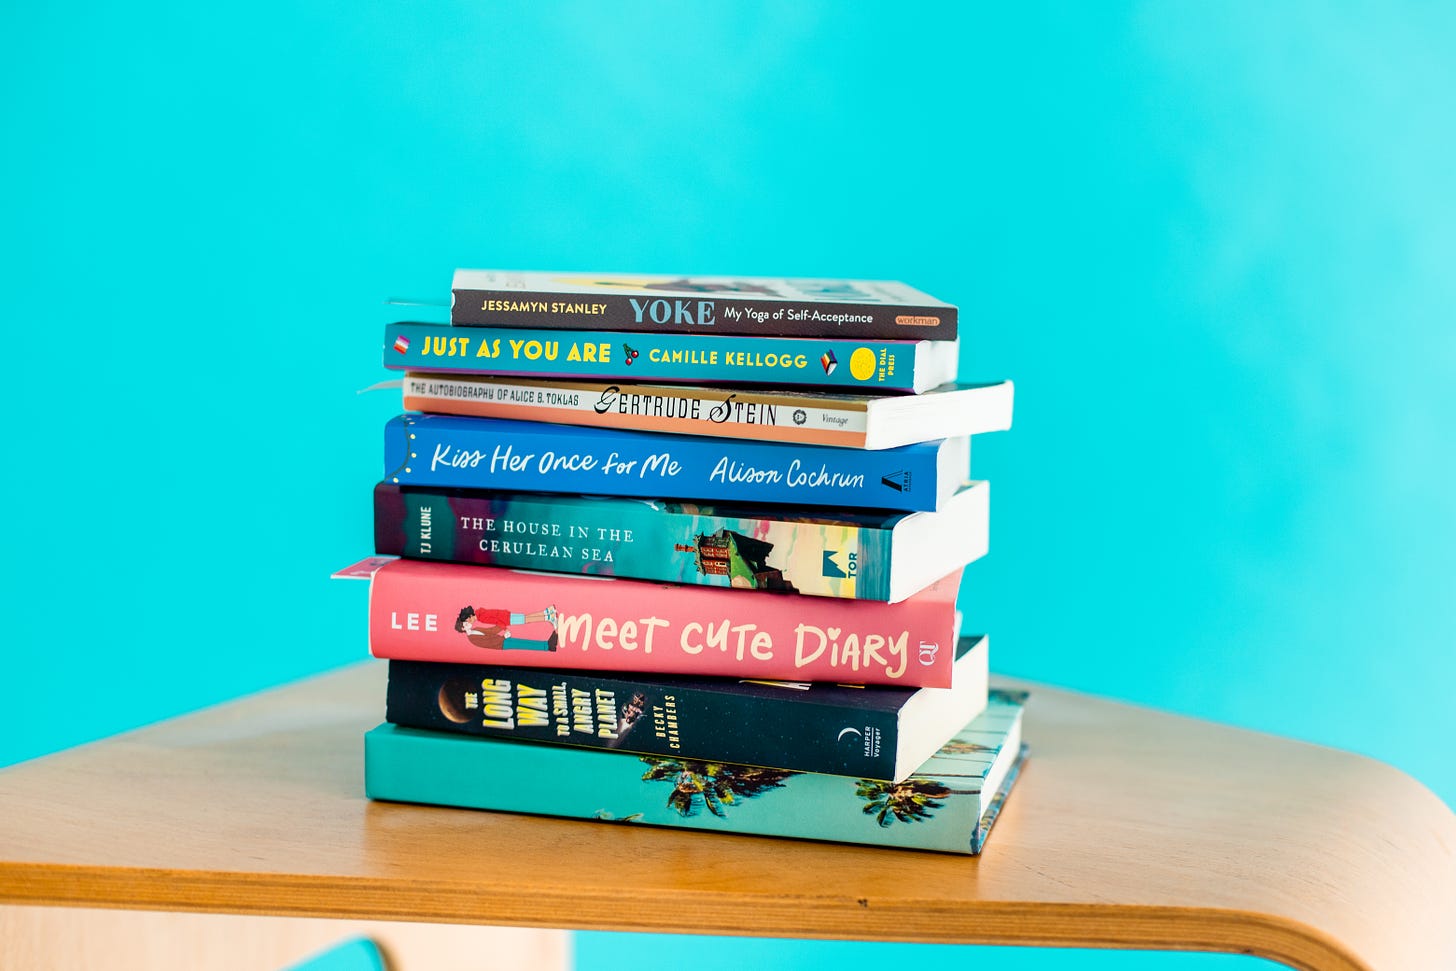 A stack of books by LGBTQ authors including Becky Chambers, Emery Lee, TJ Klune, Alison Cochrun, Gertrude Stien, Camille Kellogg, and Jessamyn Stanley.